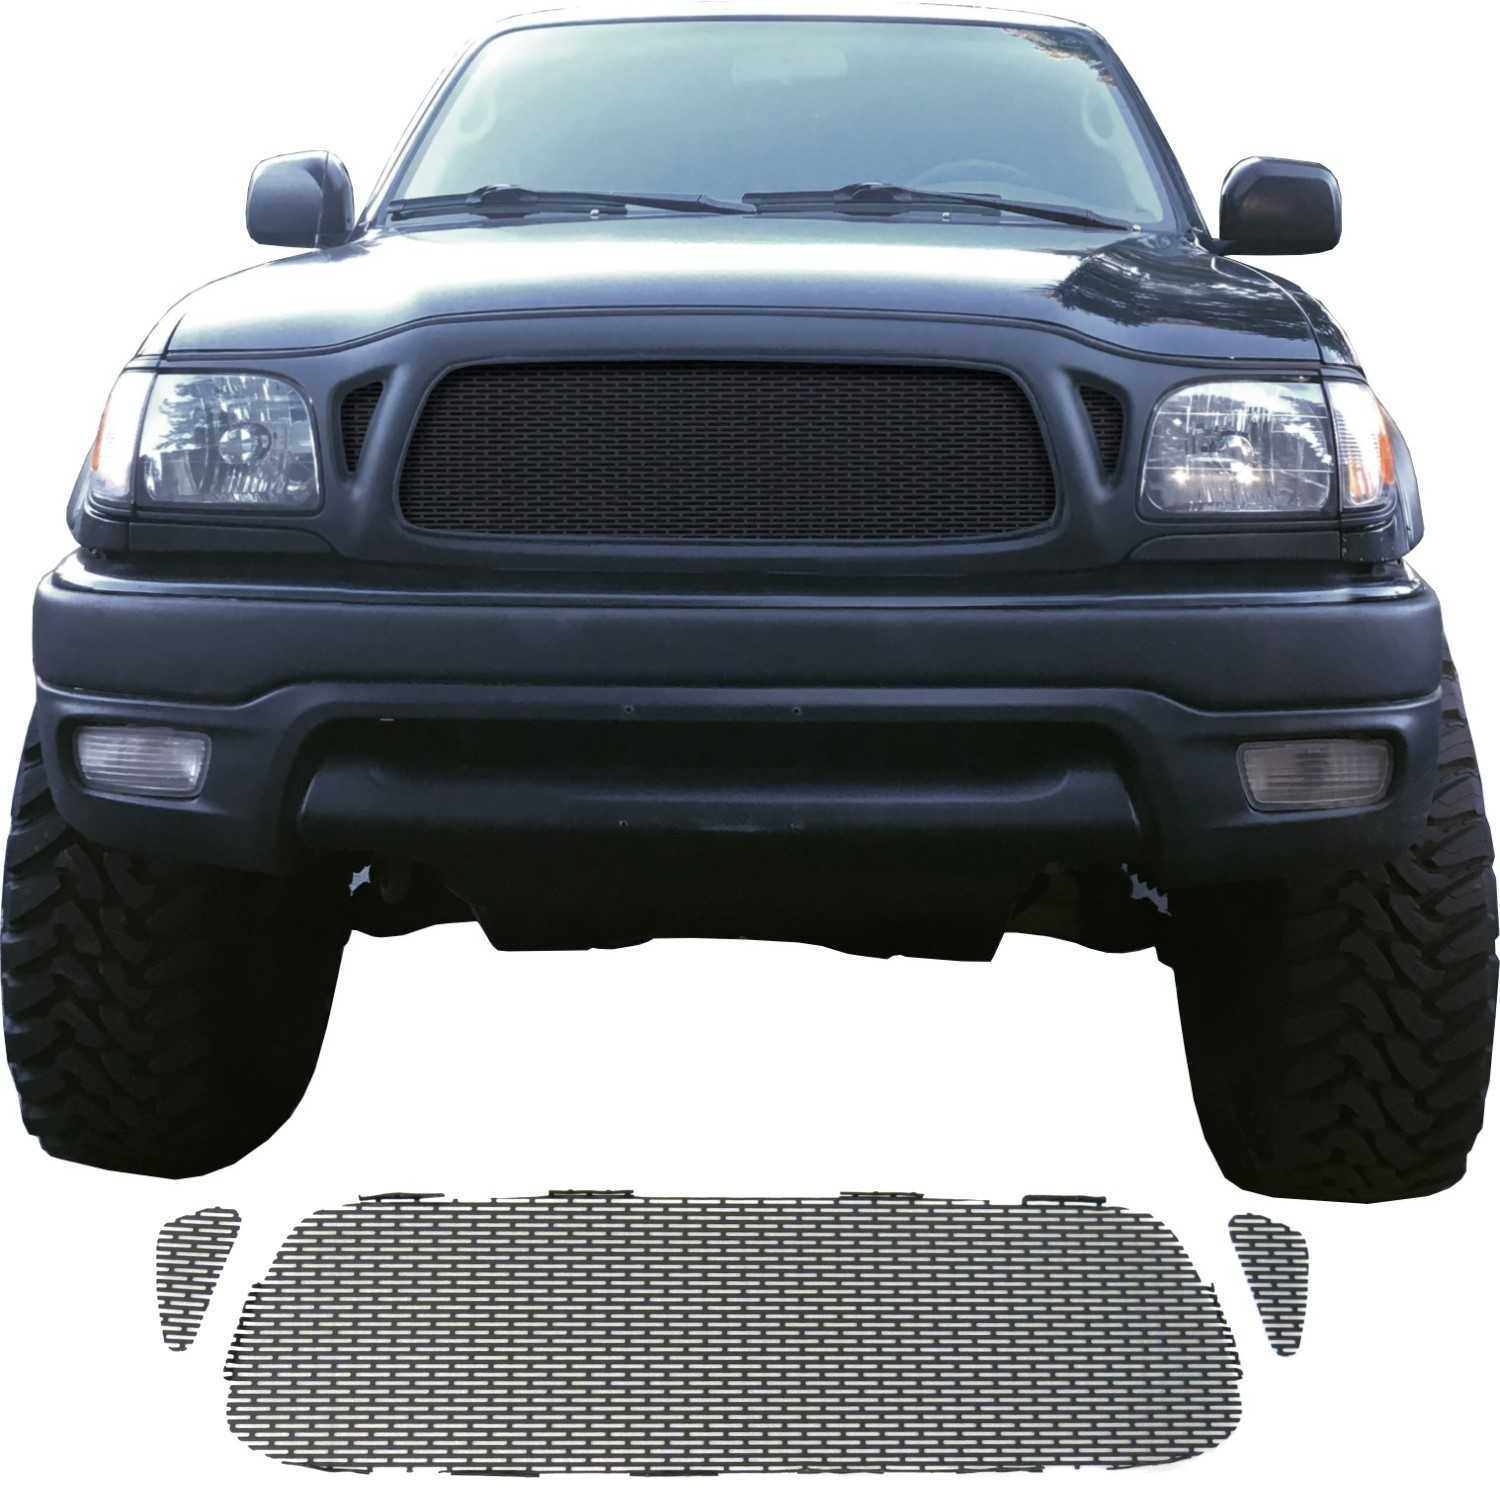 2001 - 2004 Toyota Tacoma Grill Mesh Builder